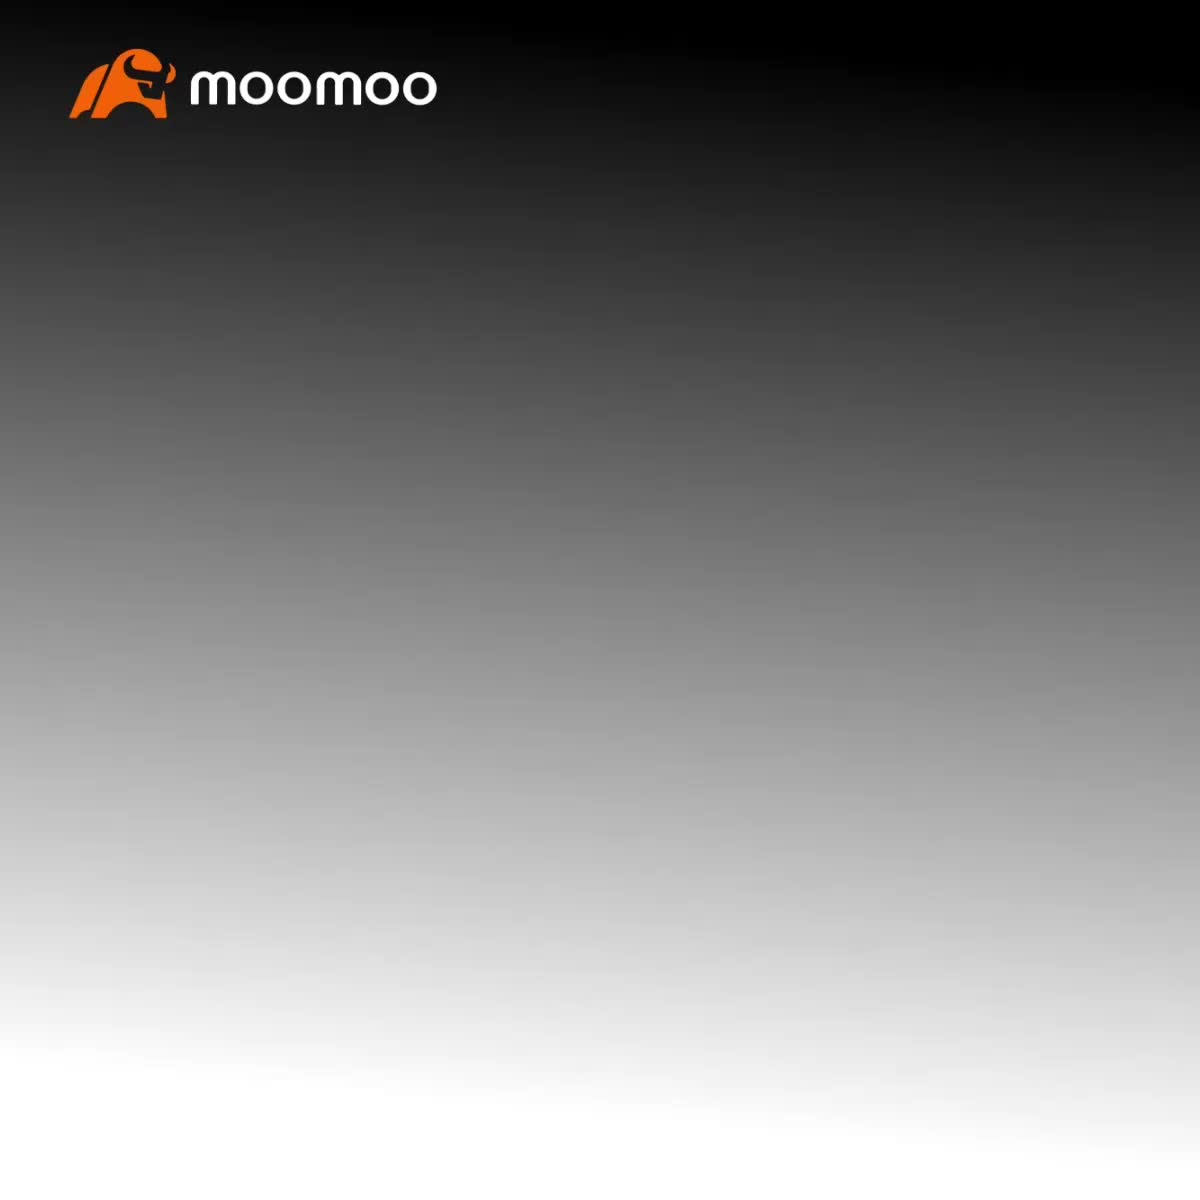 Moomoo NX Release: Join & Potentially Earn a $50 Cash Reward as a Feature Experience Officer!